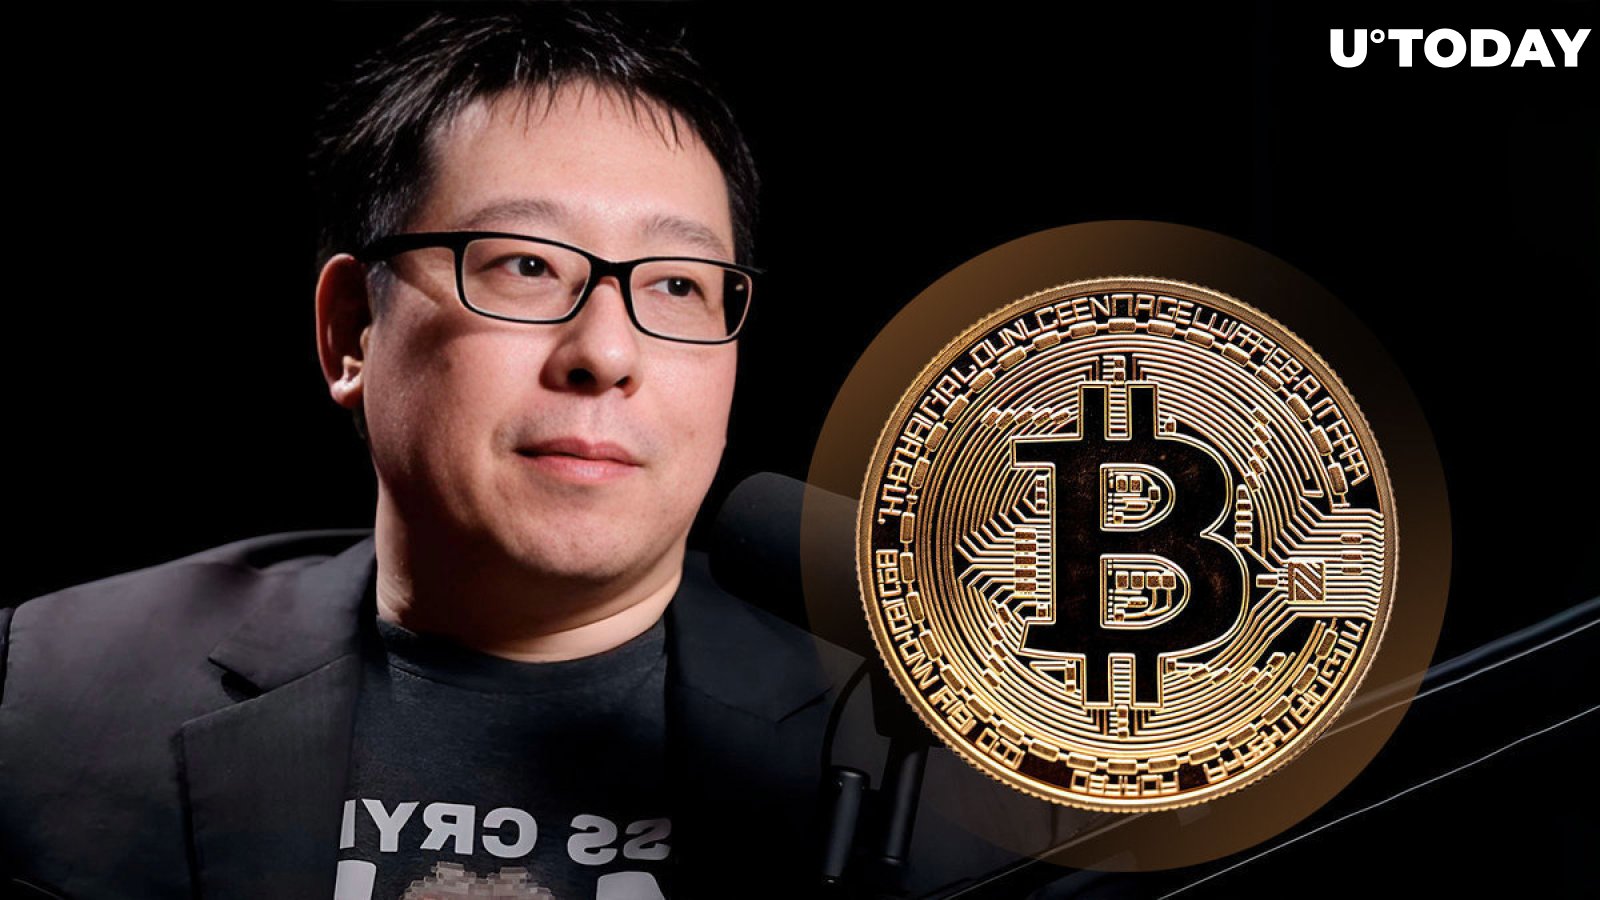 '$1 Million Bitcoin' Advocate Samson Mow Owns Bitcoin ETFs, but He Sold MicroStrategy Shares